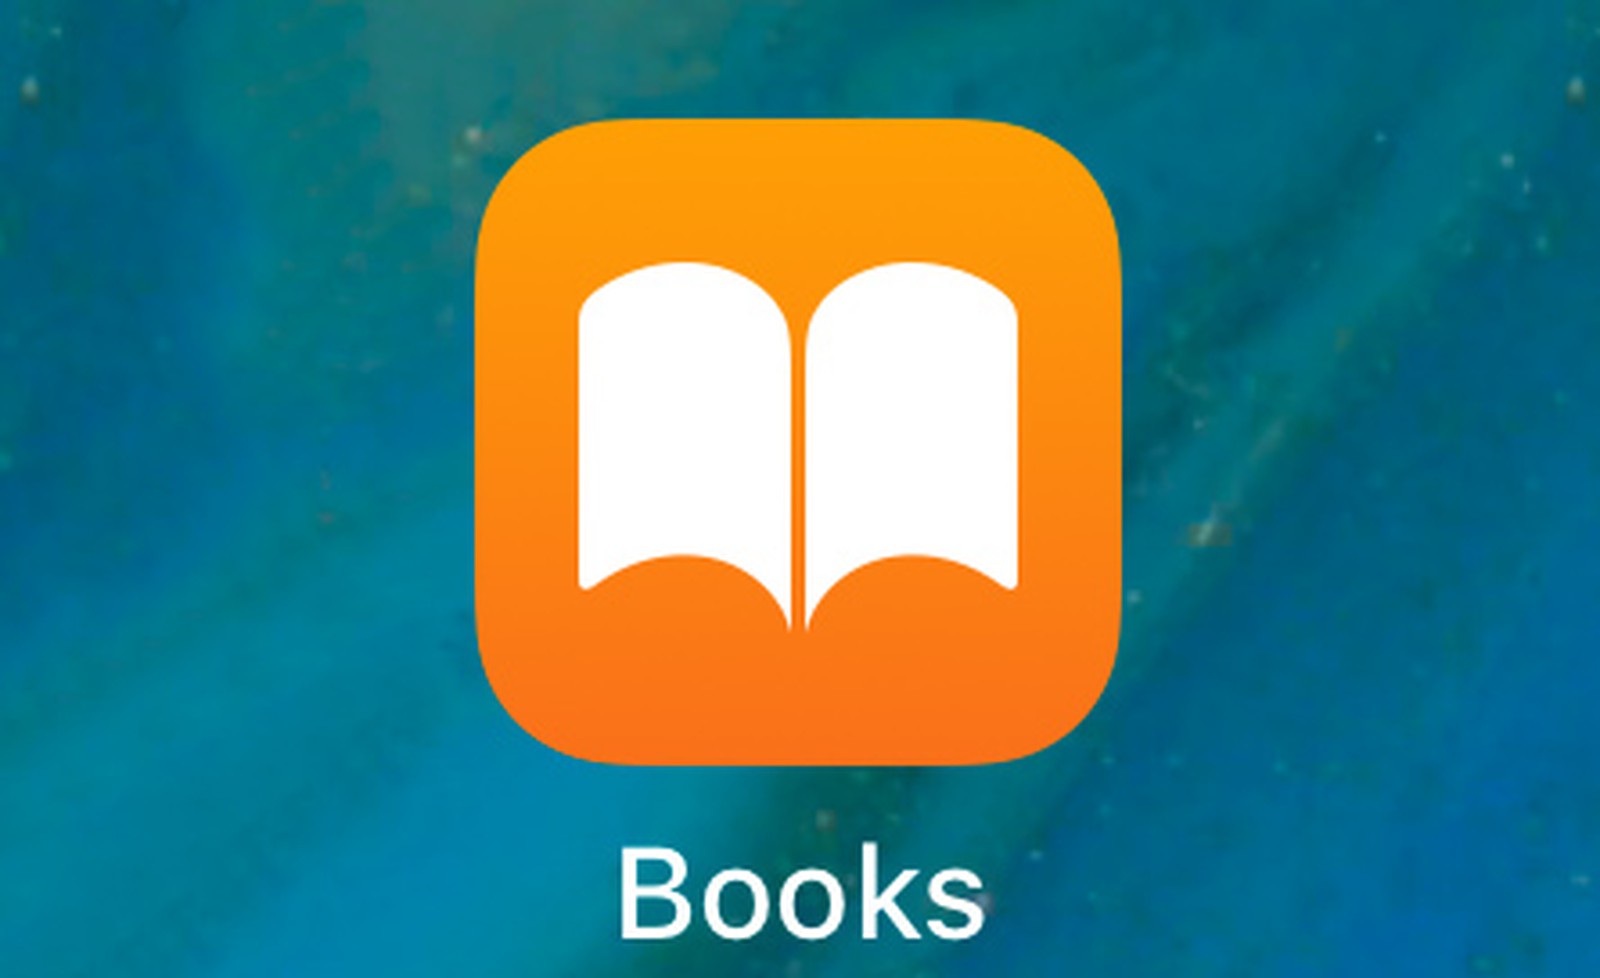 Apple Working on Redesigned Books App With 'Simpler' Interface